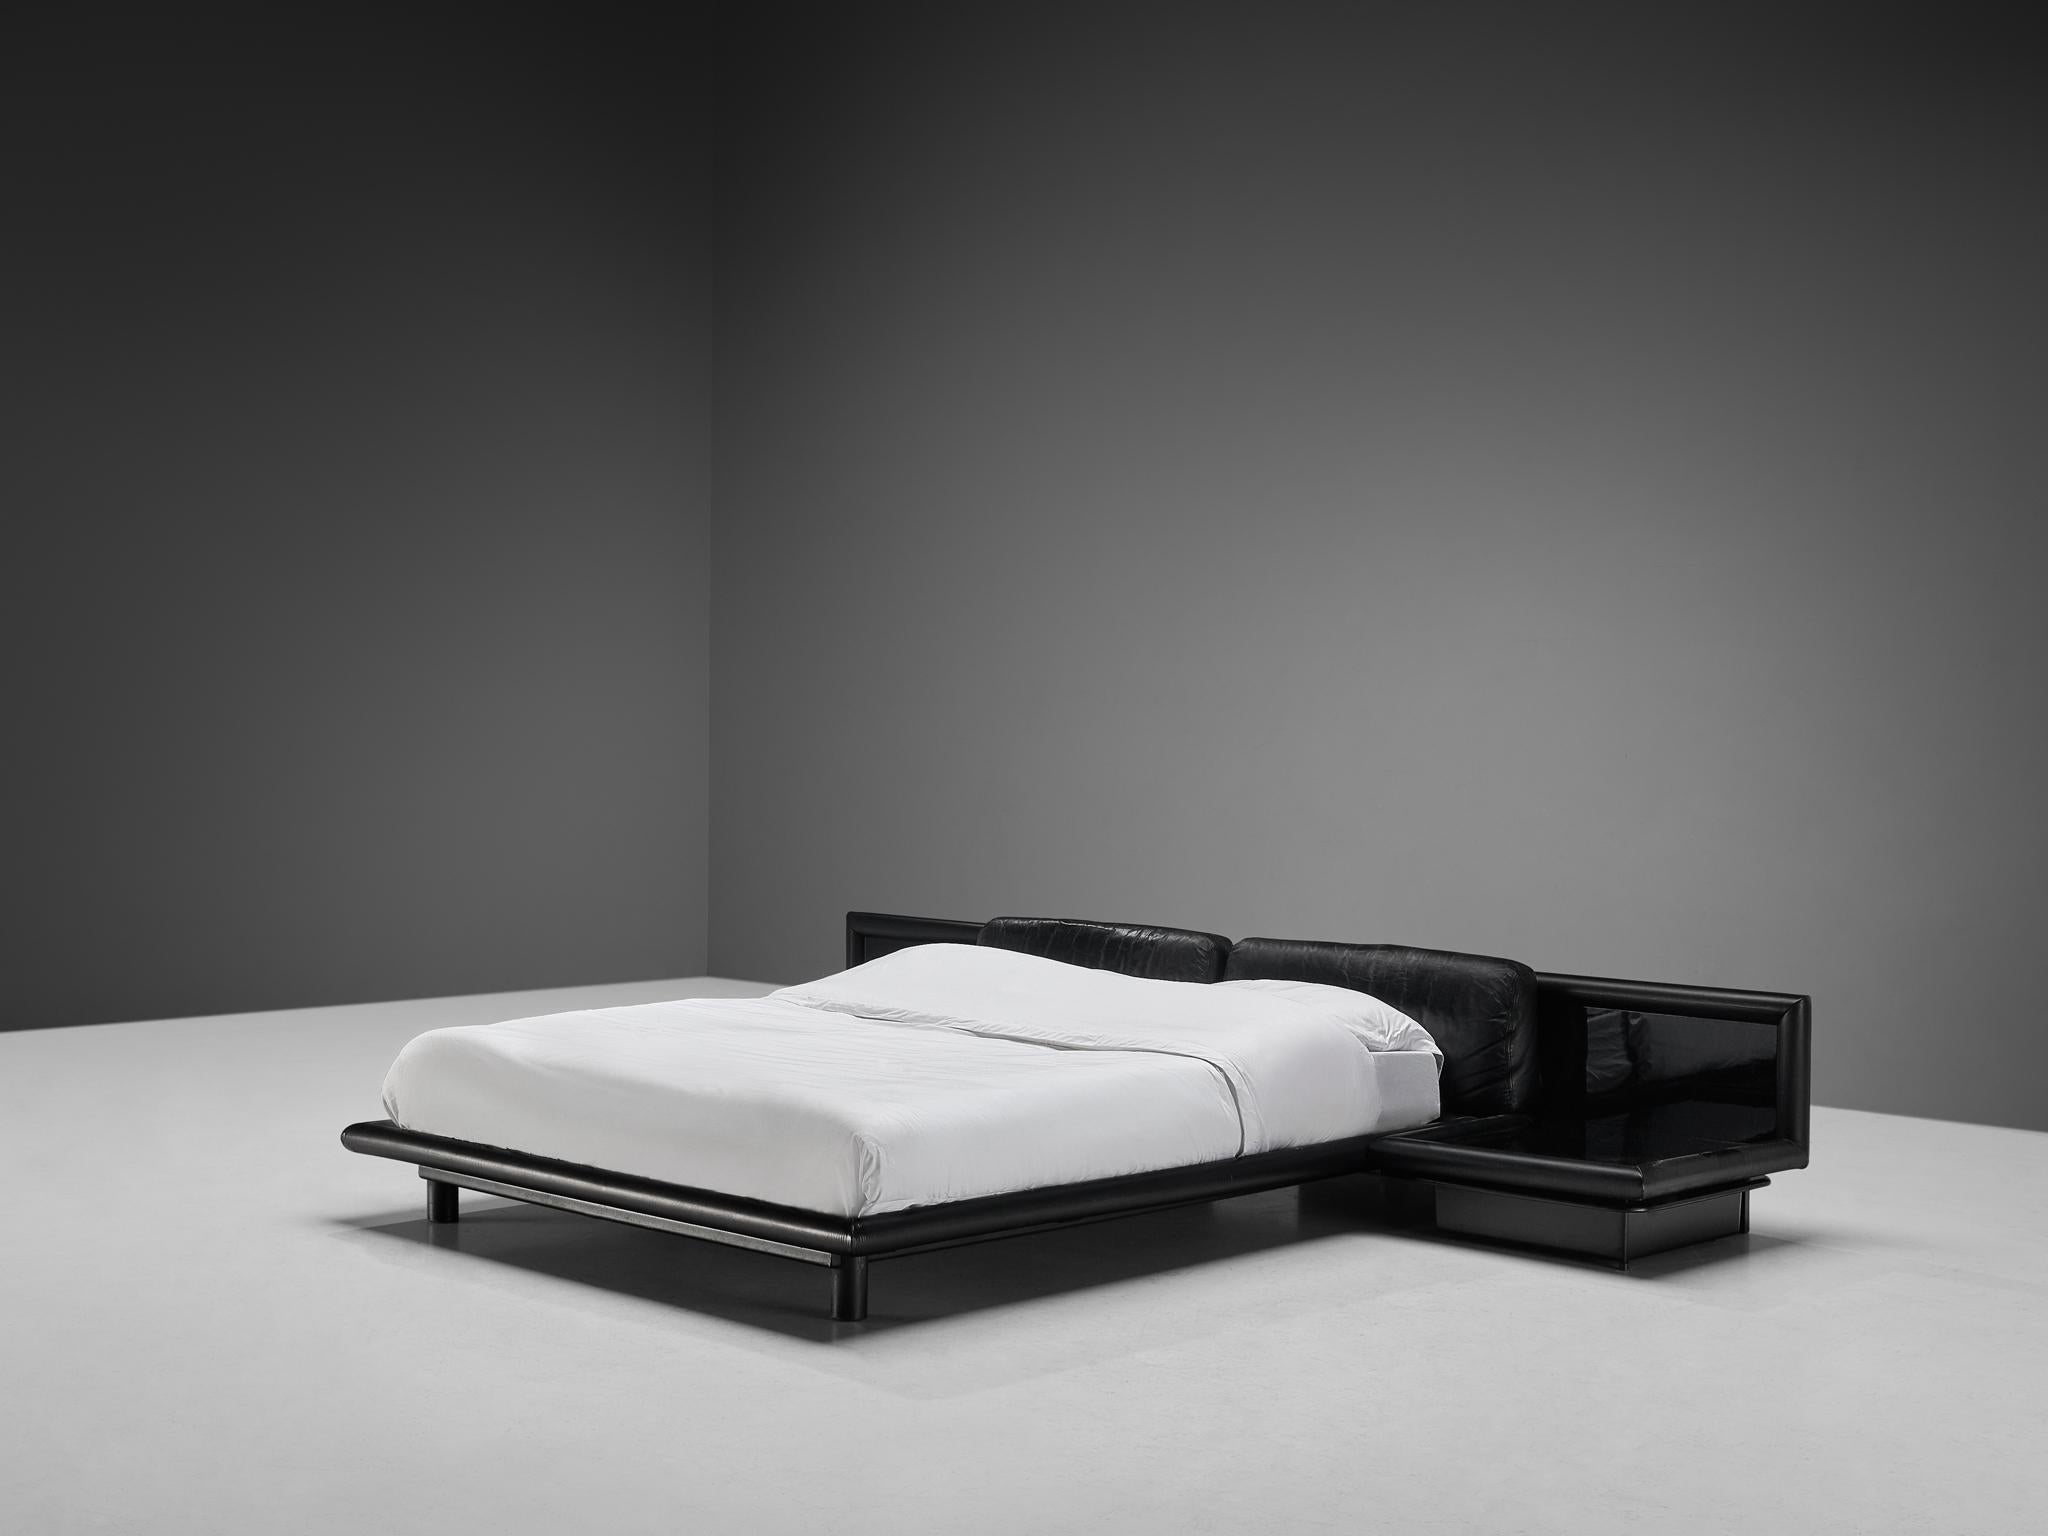 Afra & Tobia Scarpa for Molteni ‘Morna’ Bed with Nightstands